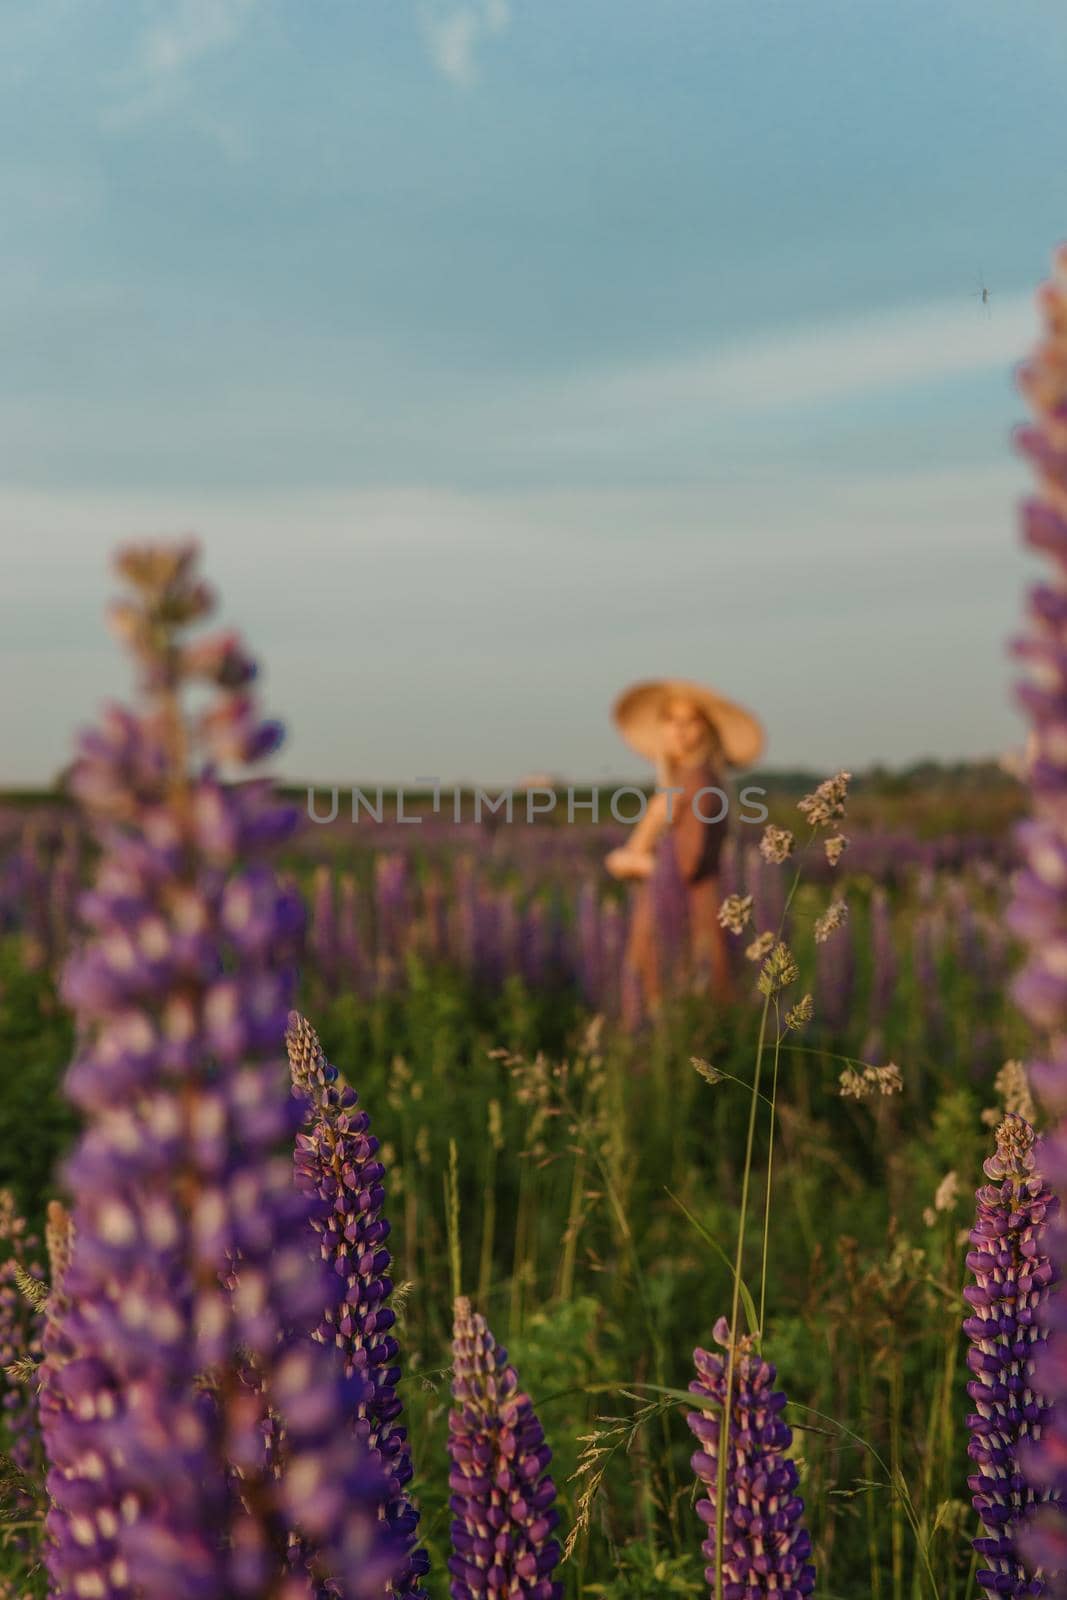 A beautiful woman in a straw hat walks in a field with purple flowers. A walk in nature in the lupin field by Annu1tochka